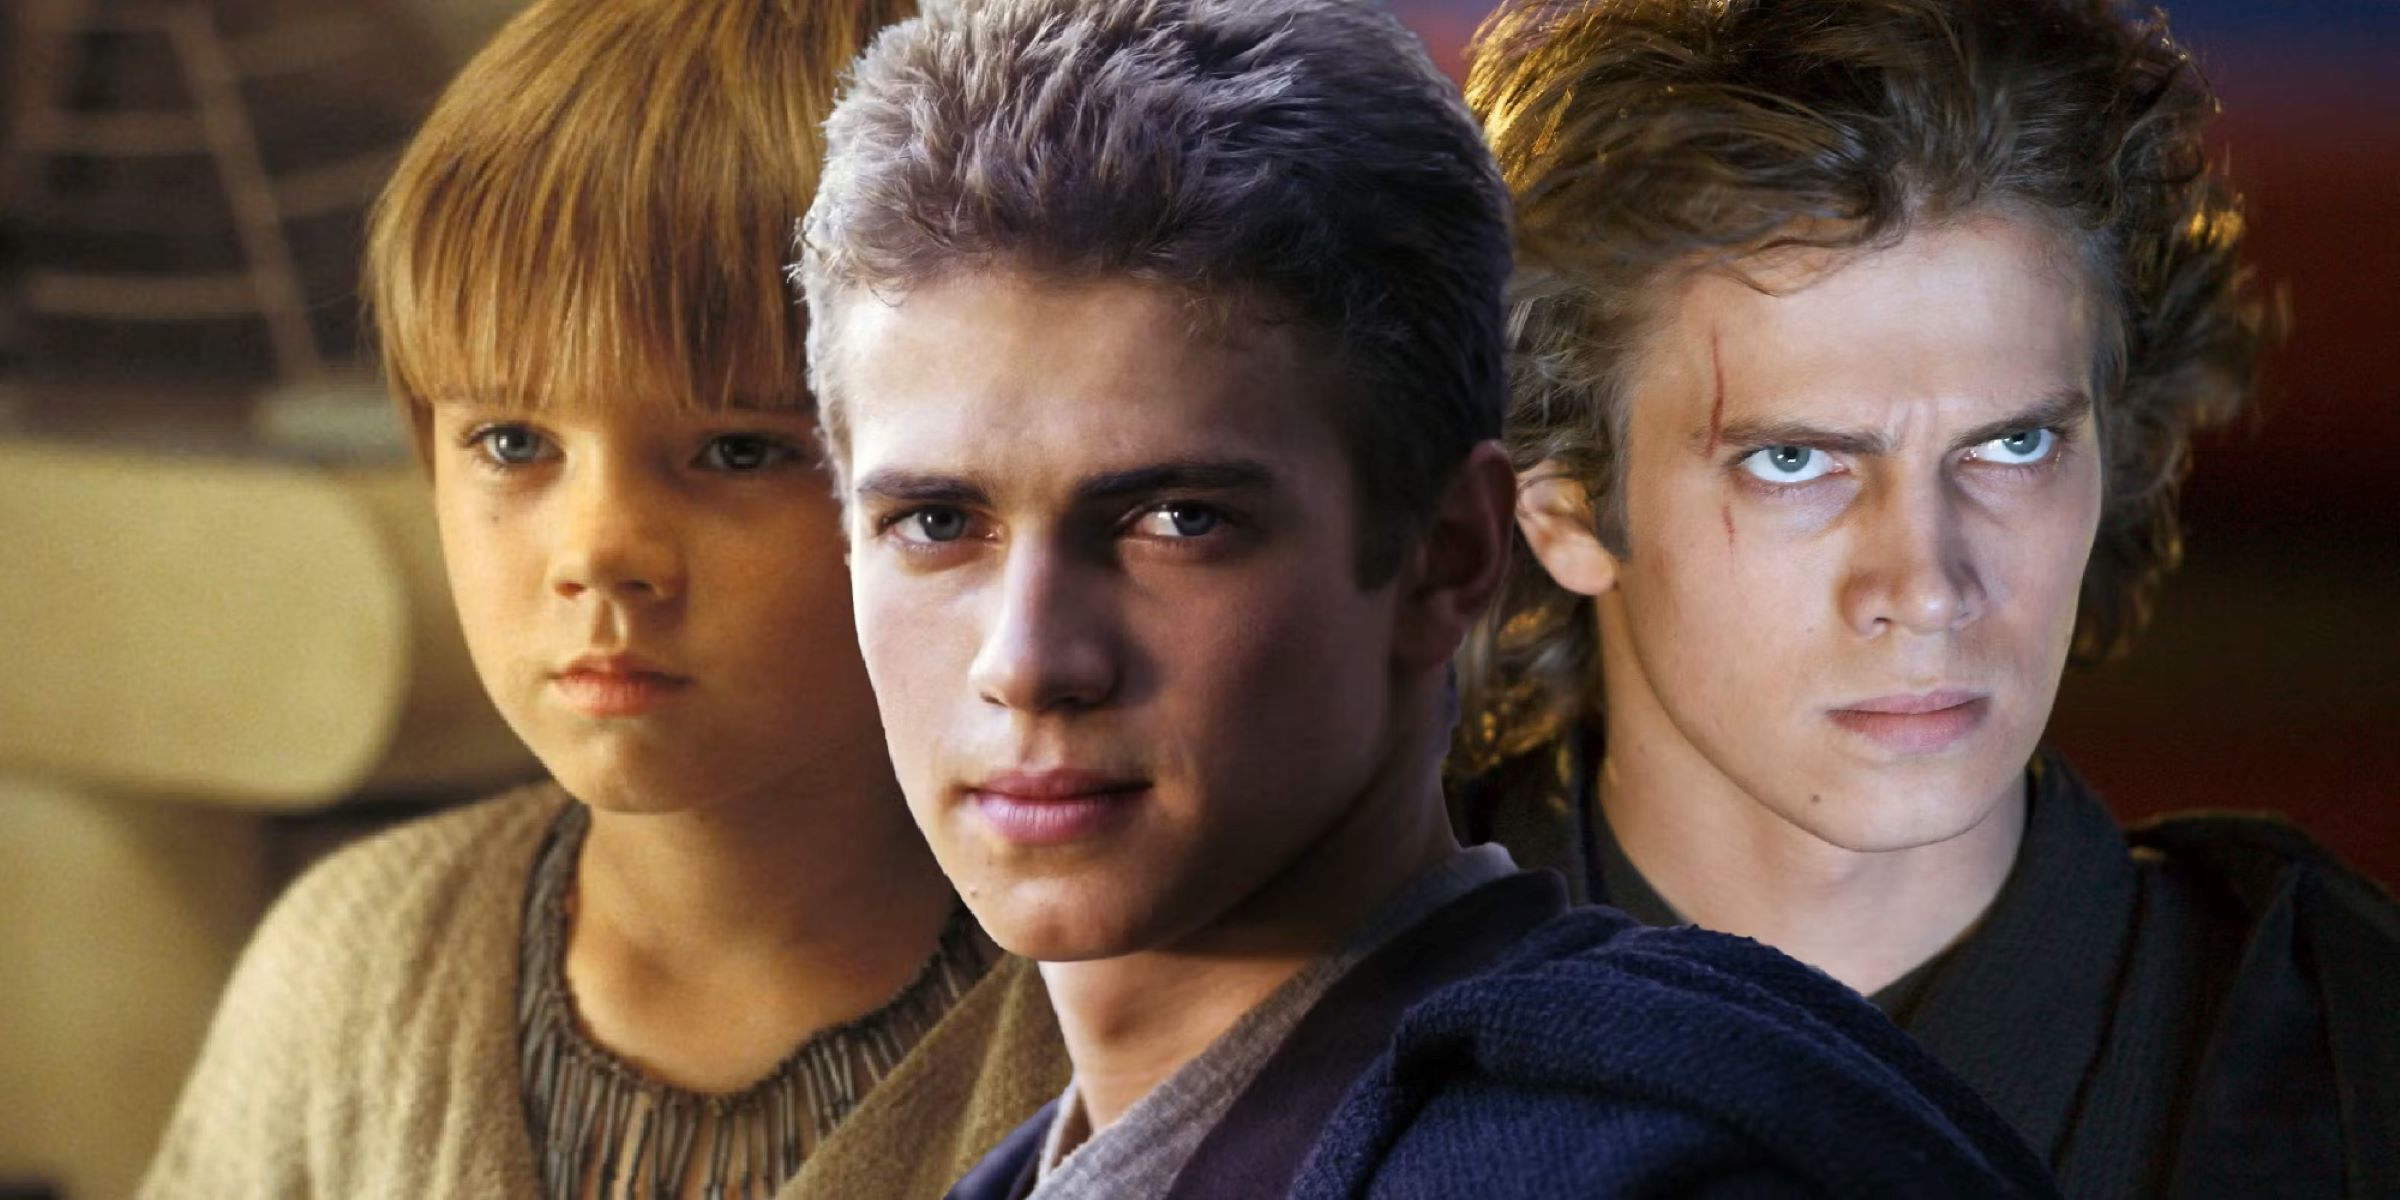 Anakin's Age Difference In The Clone Wars Vs. The Phantom Menace Will Shock You!